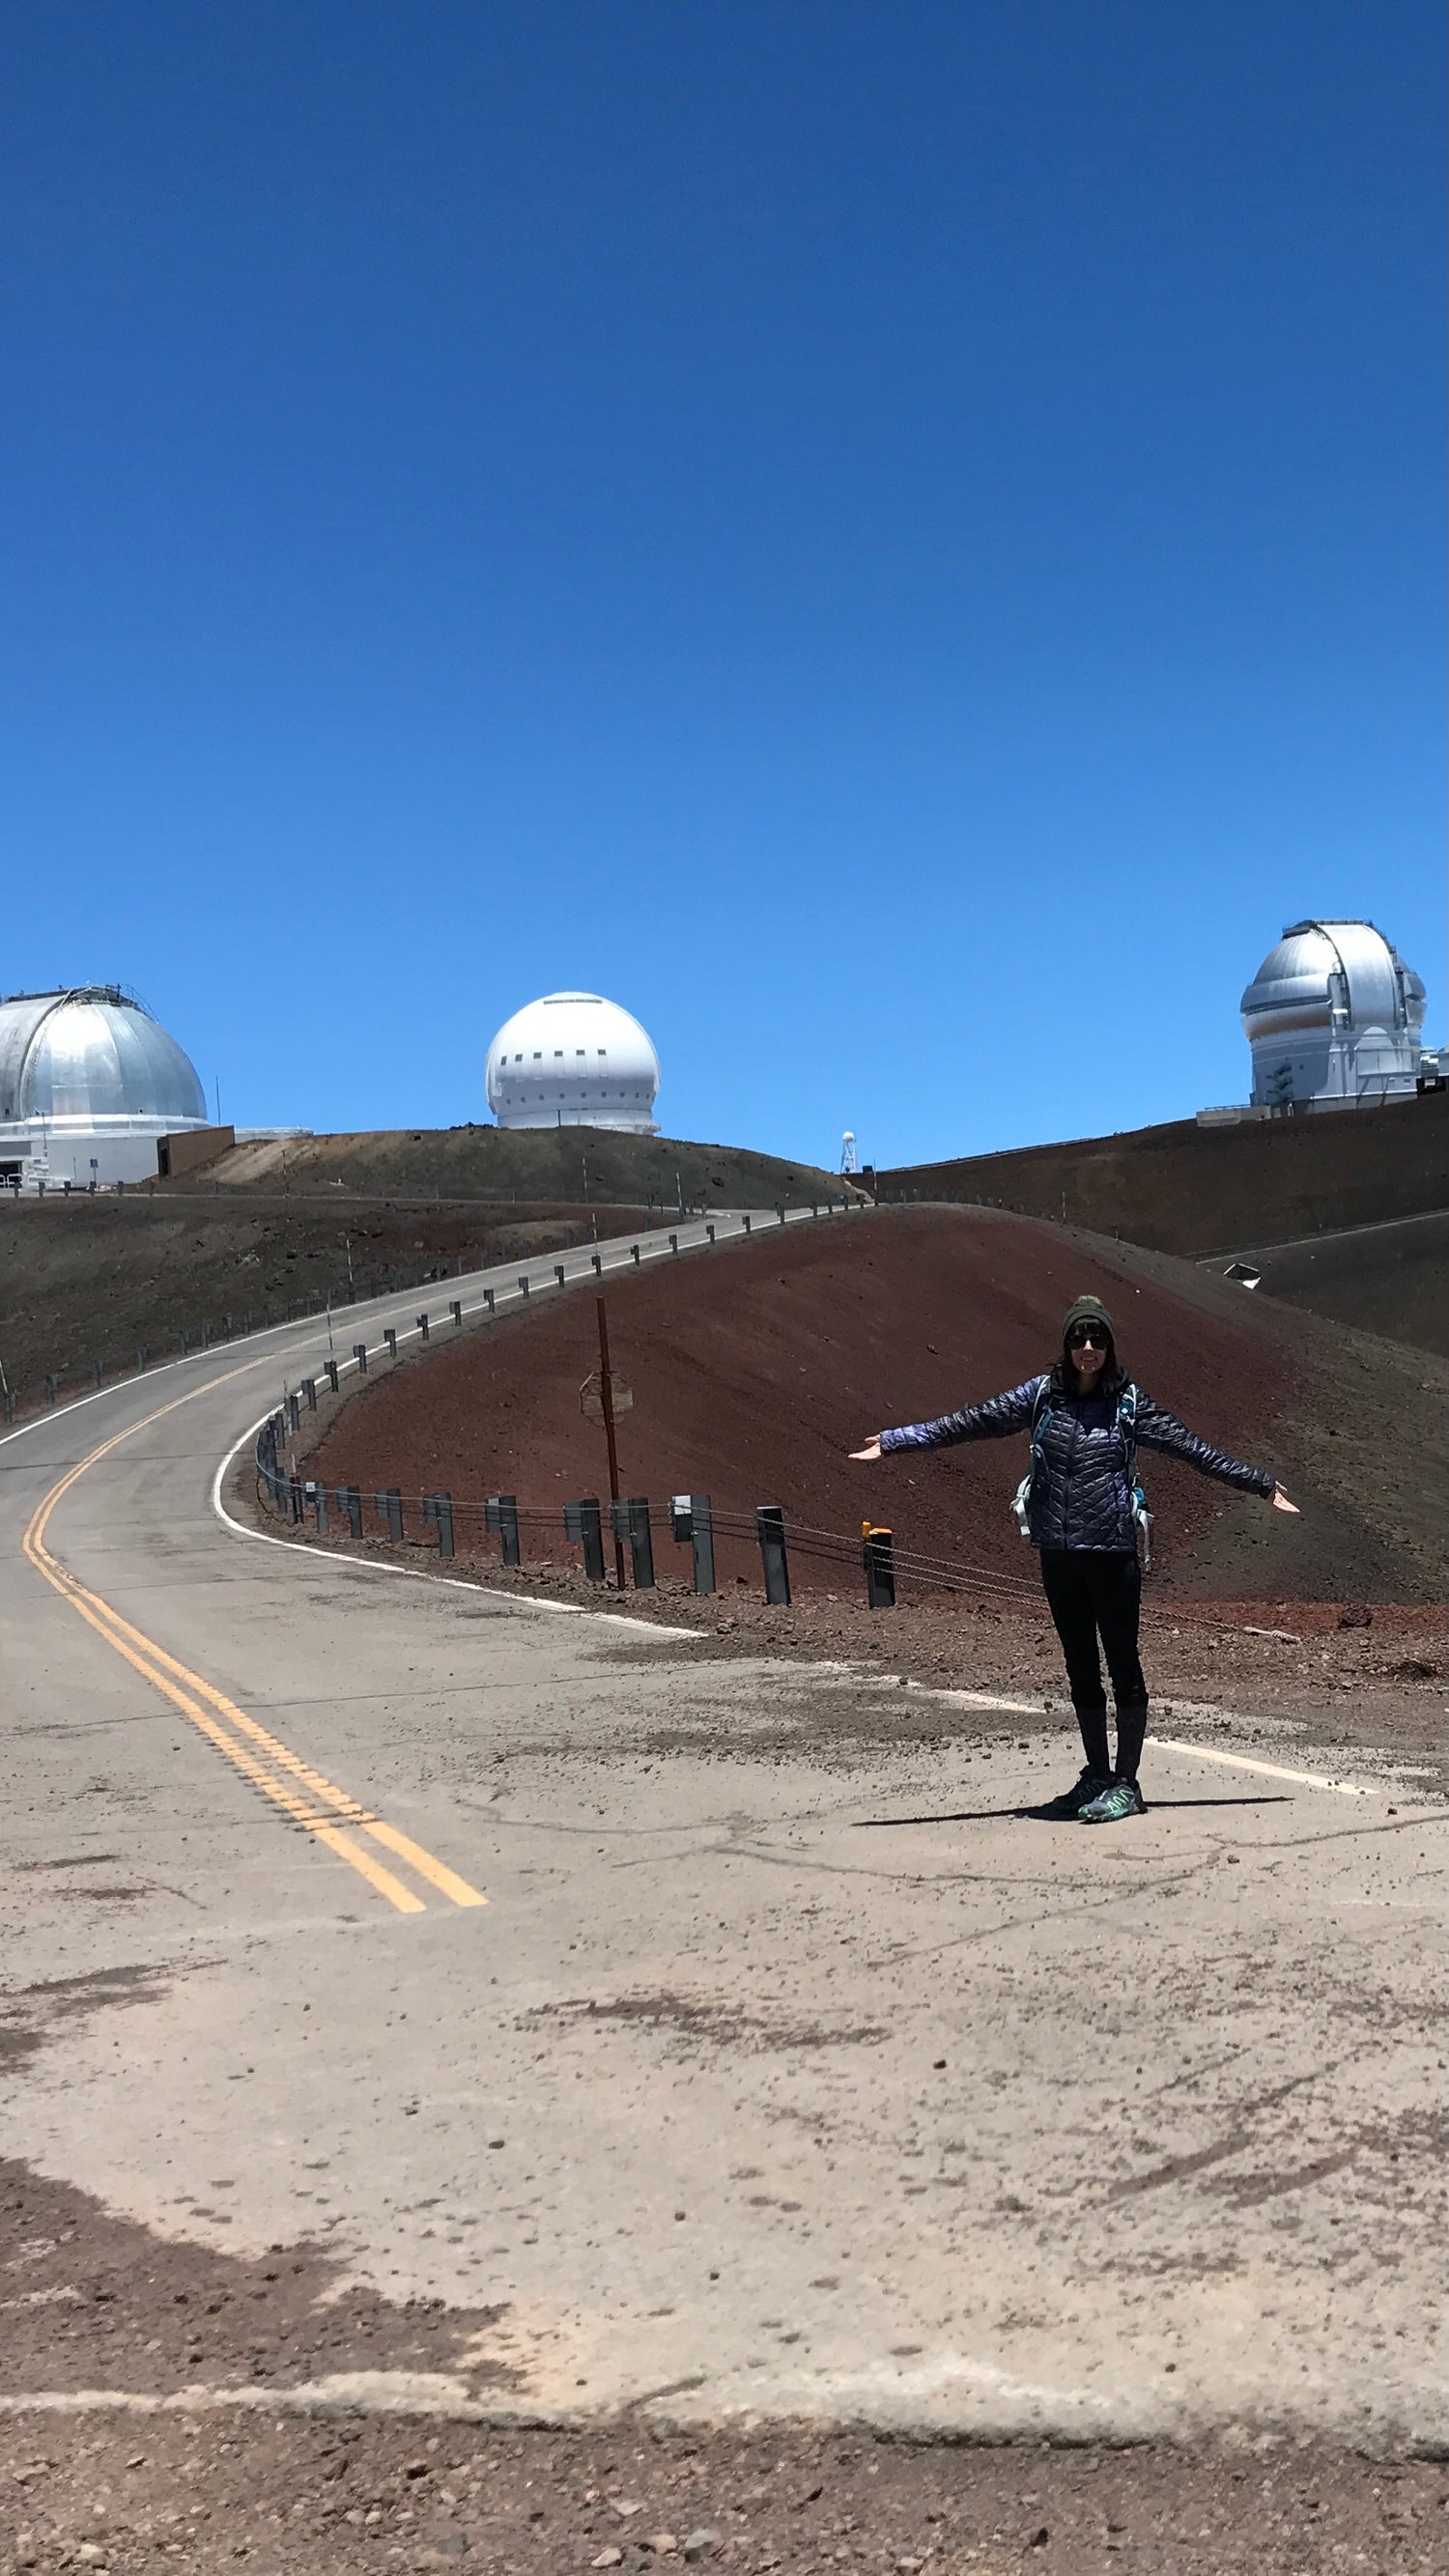 Laci standing at the top of Mauna Kea in Hawaii with telescopes in the background